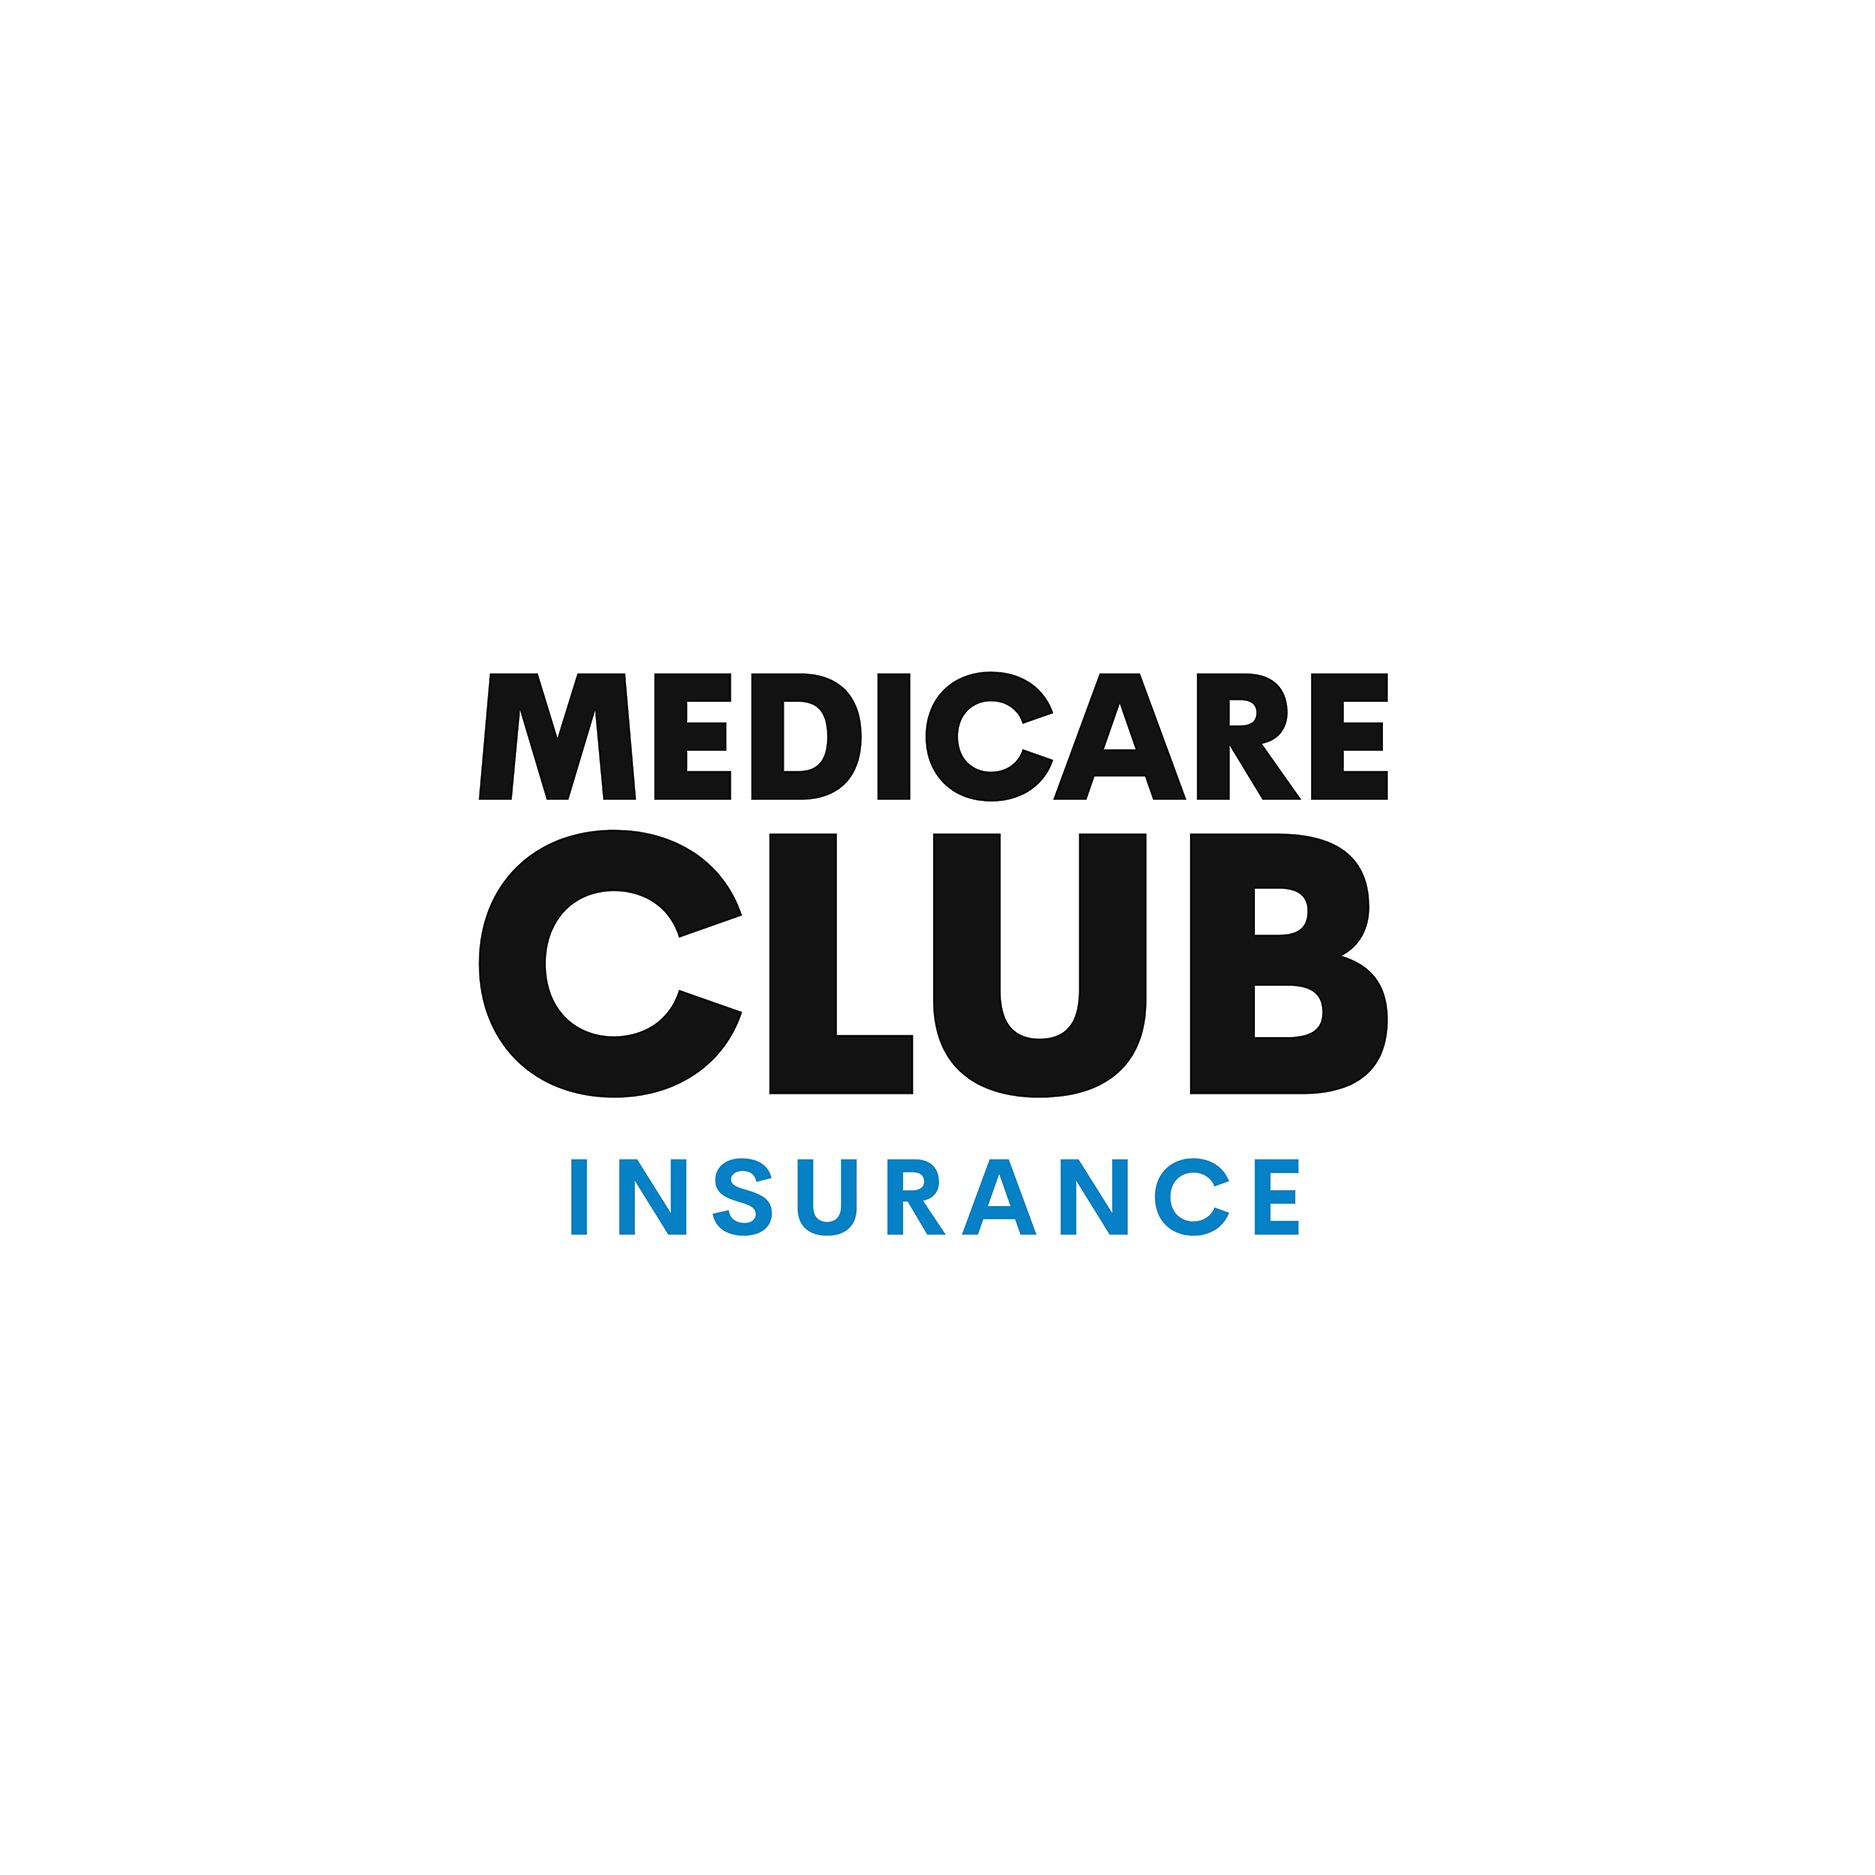 Image of The Medicare Club